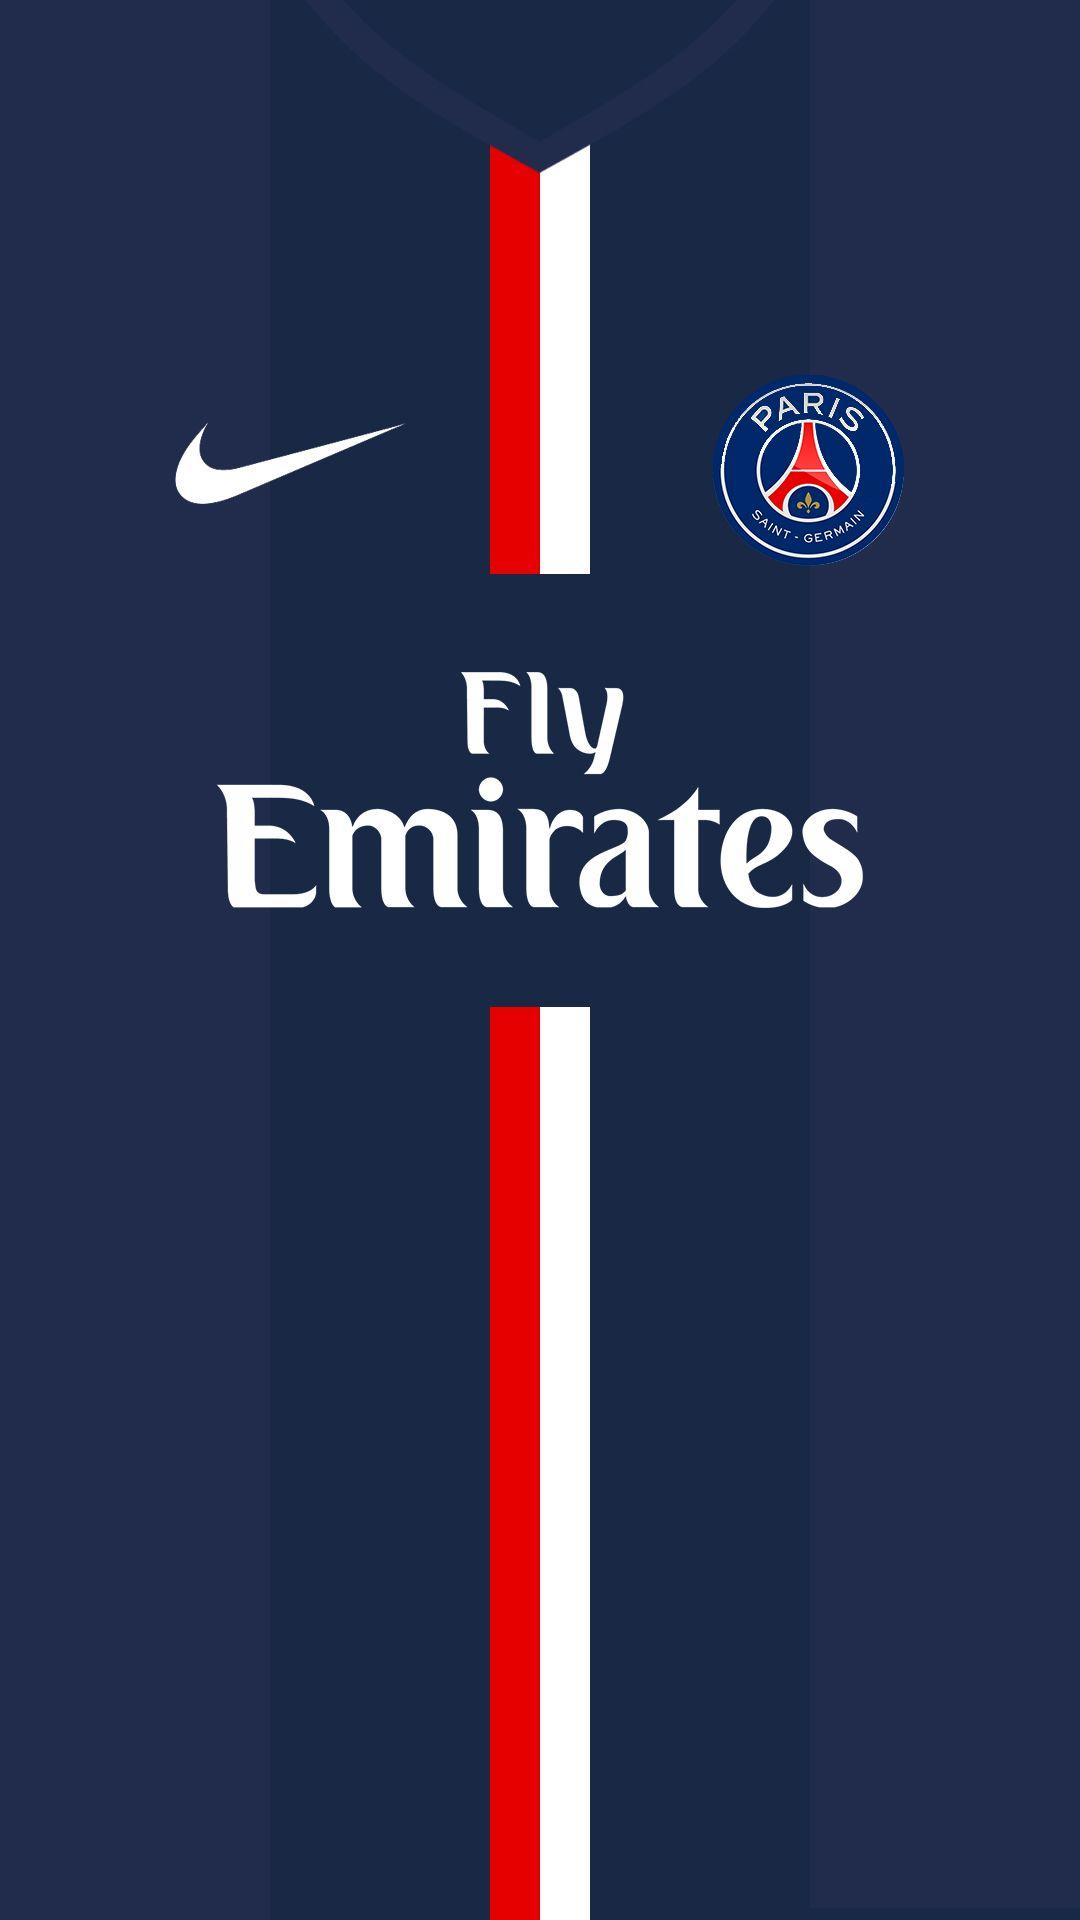 Nike, Wallpapers and PSG